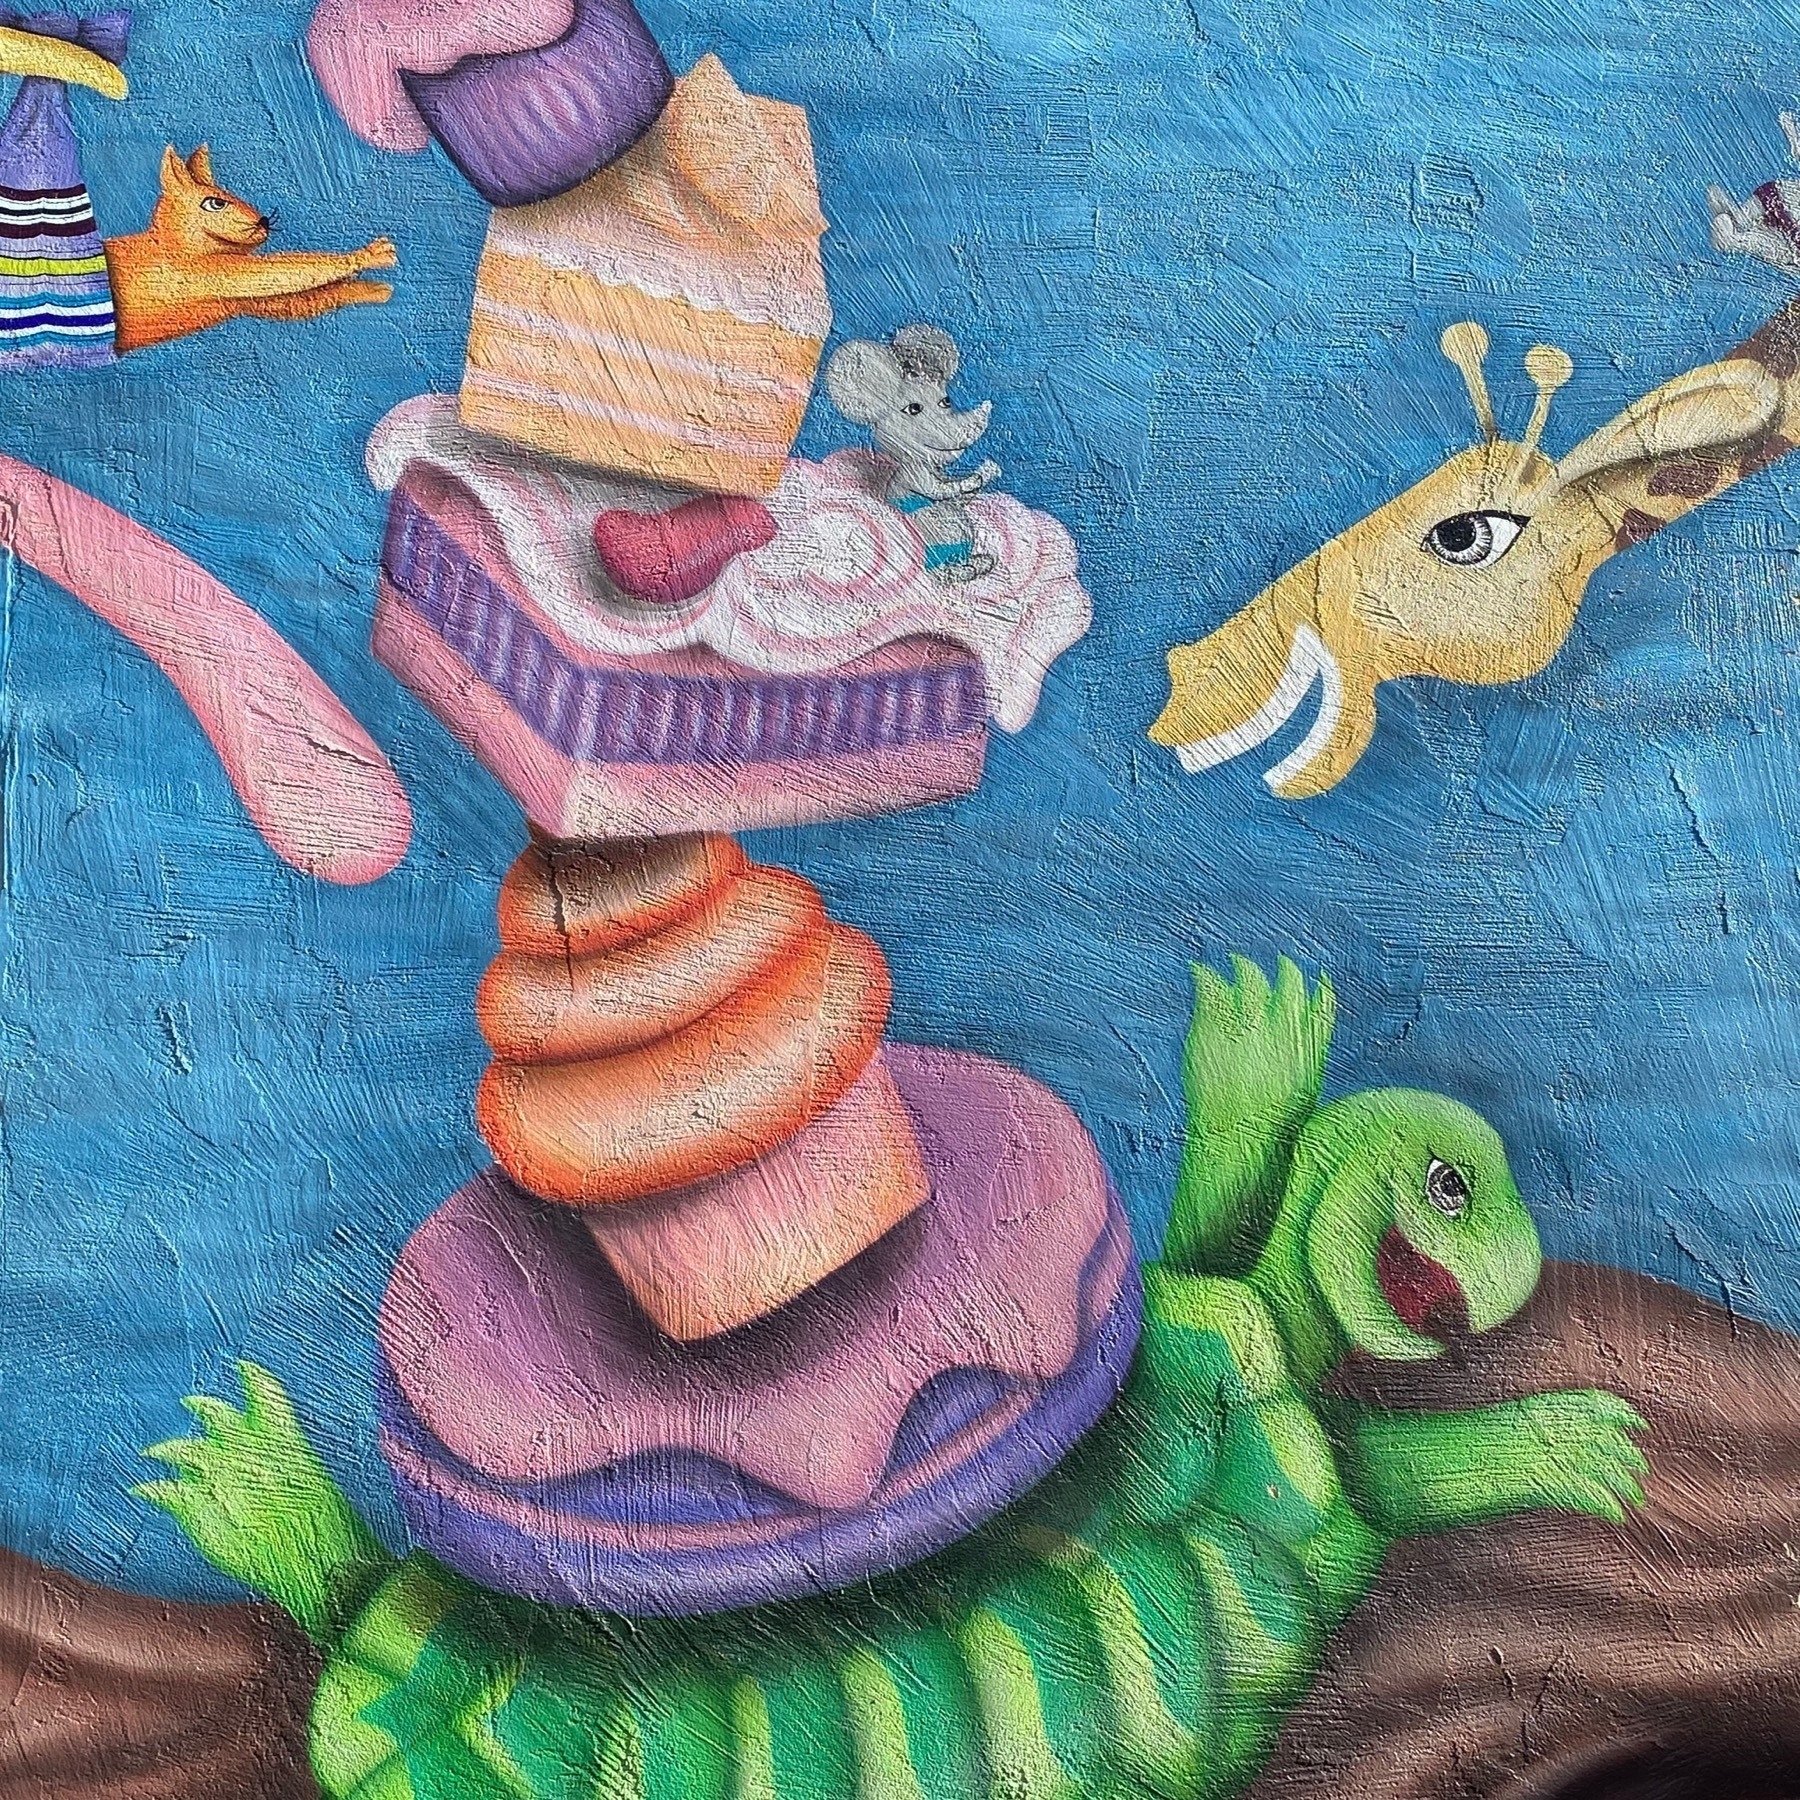 Wall mural of a turtle in its back with a pile of pastries on top, a mouse, cat, and giraffe trying to eat the pastries.